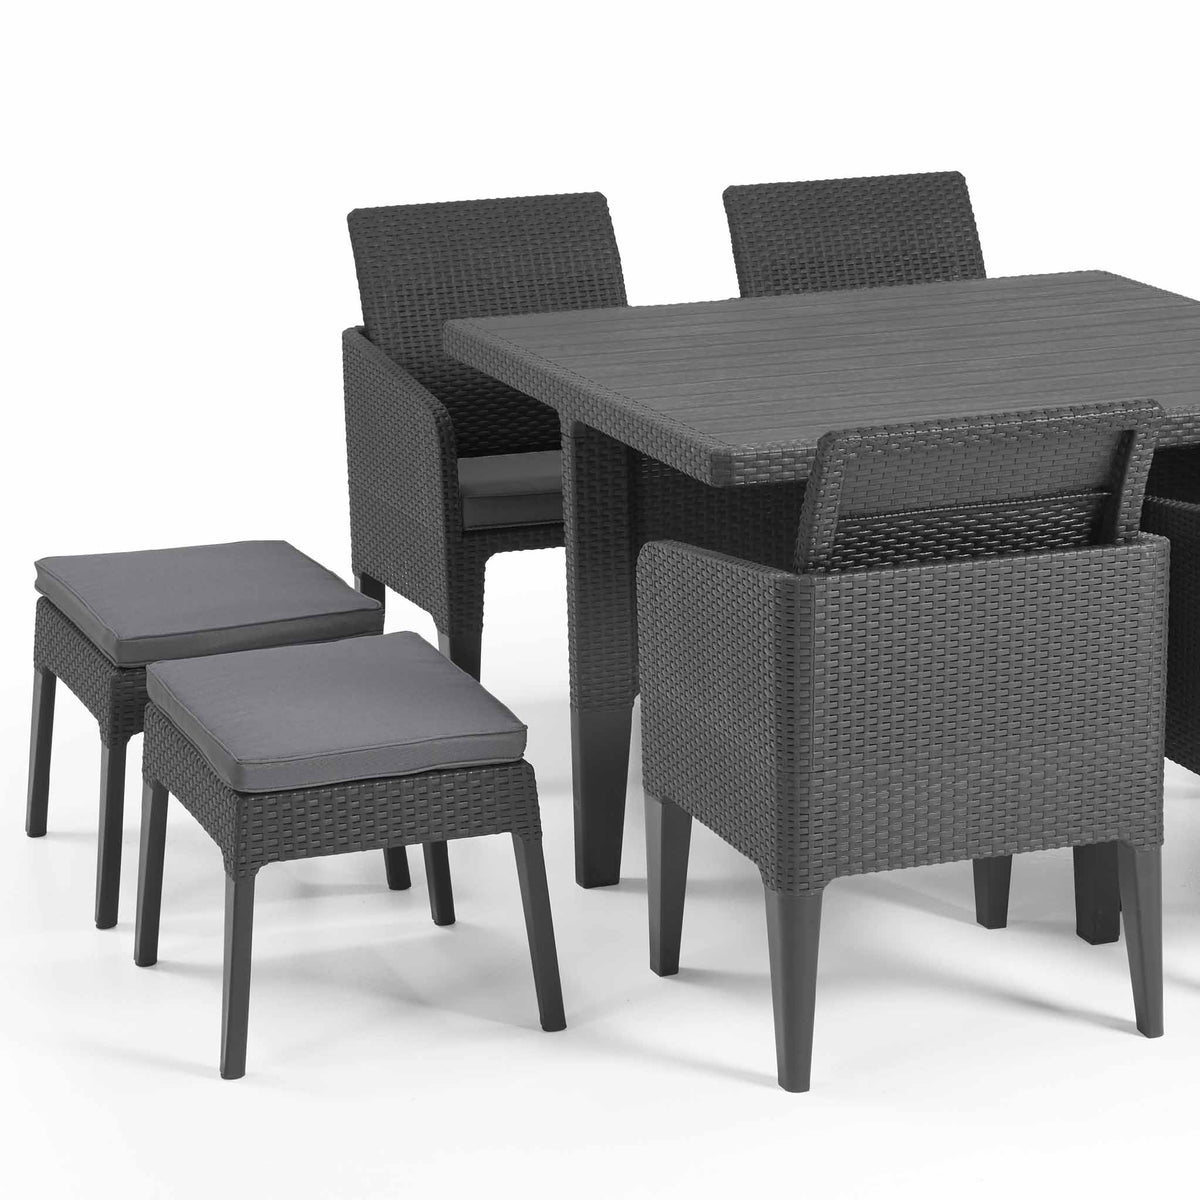 Keter Dine Out 4-8 Seater Dining Set